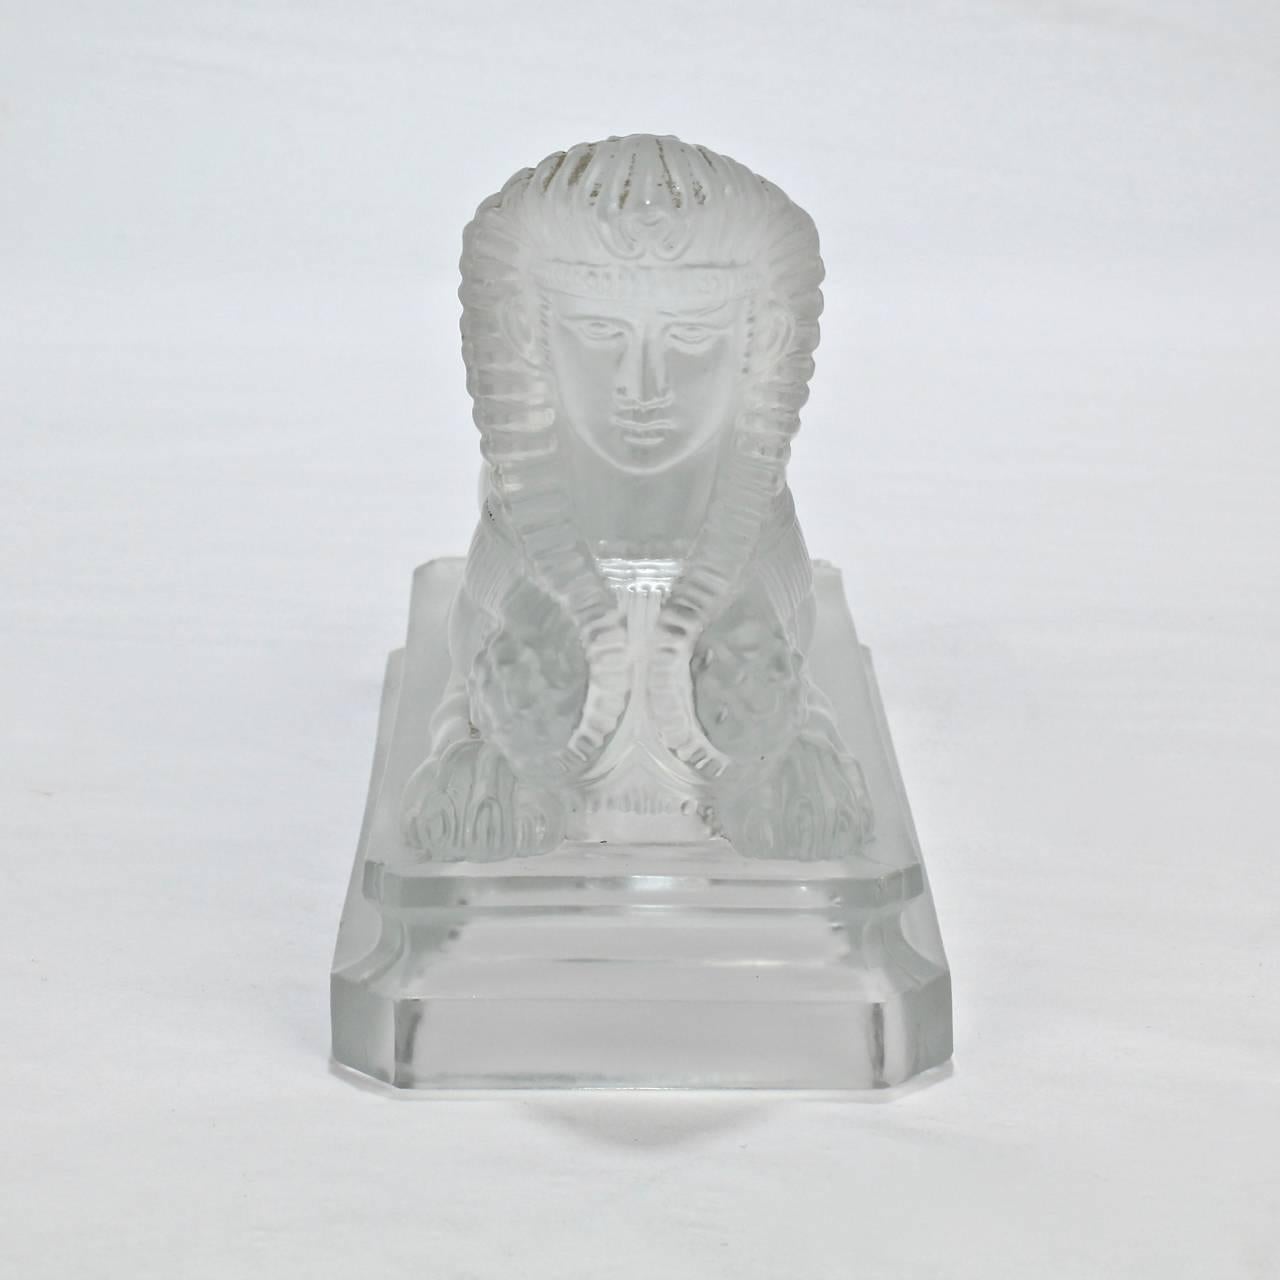 A rare antique pressed glass model of a sphinx by Saint Louis - the premiere French 19th and 20th century glass house.

Purportedly, Saint Louis exhibited a similar sphinx model the 1876 World's Fair Centennial Exhibition. A limited number of